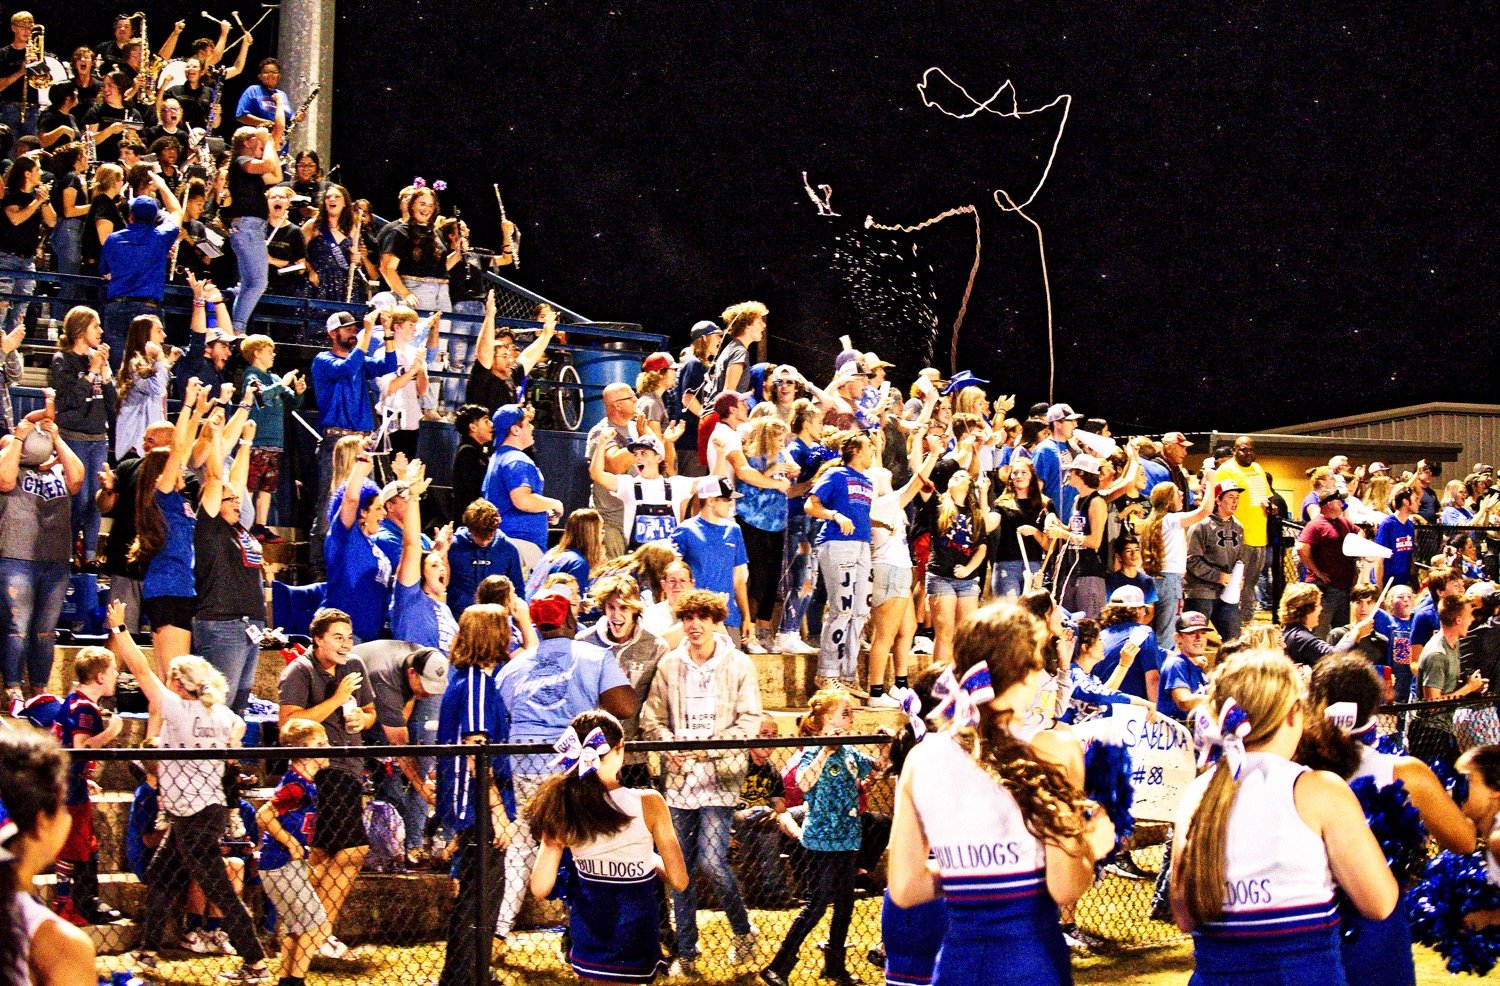 A jubilant student section celebrates a pick-sick, 58-yard interception return by Mikey Pickering. [See more from the Quitman homecoming game.]